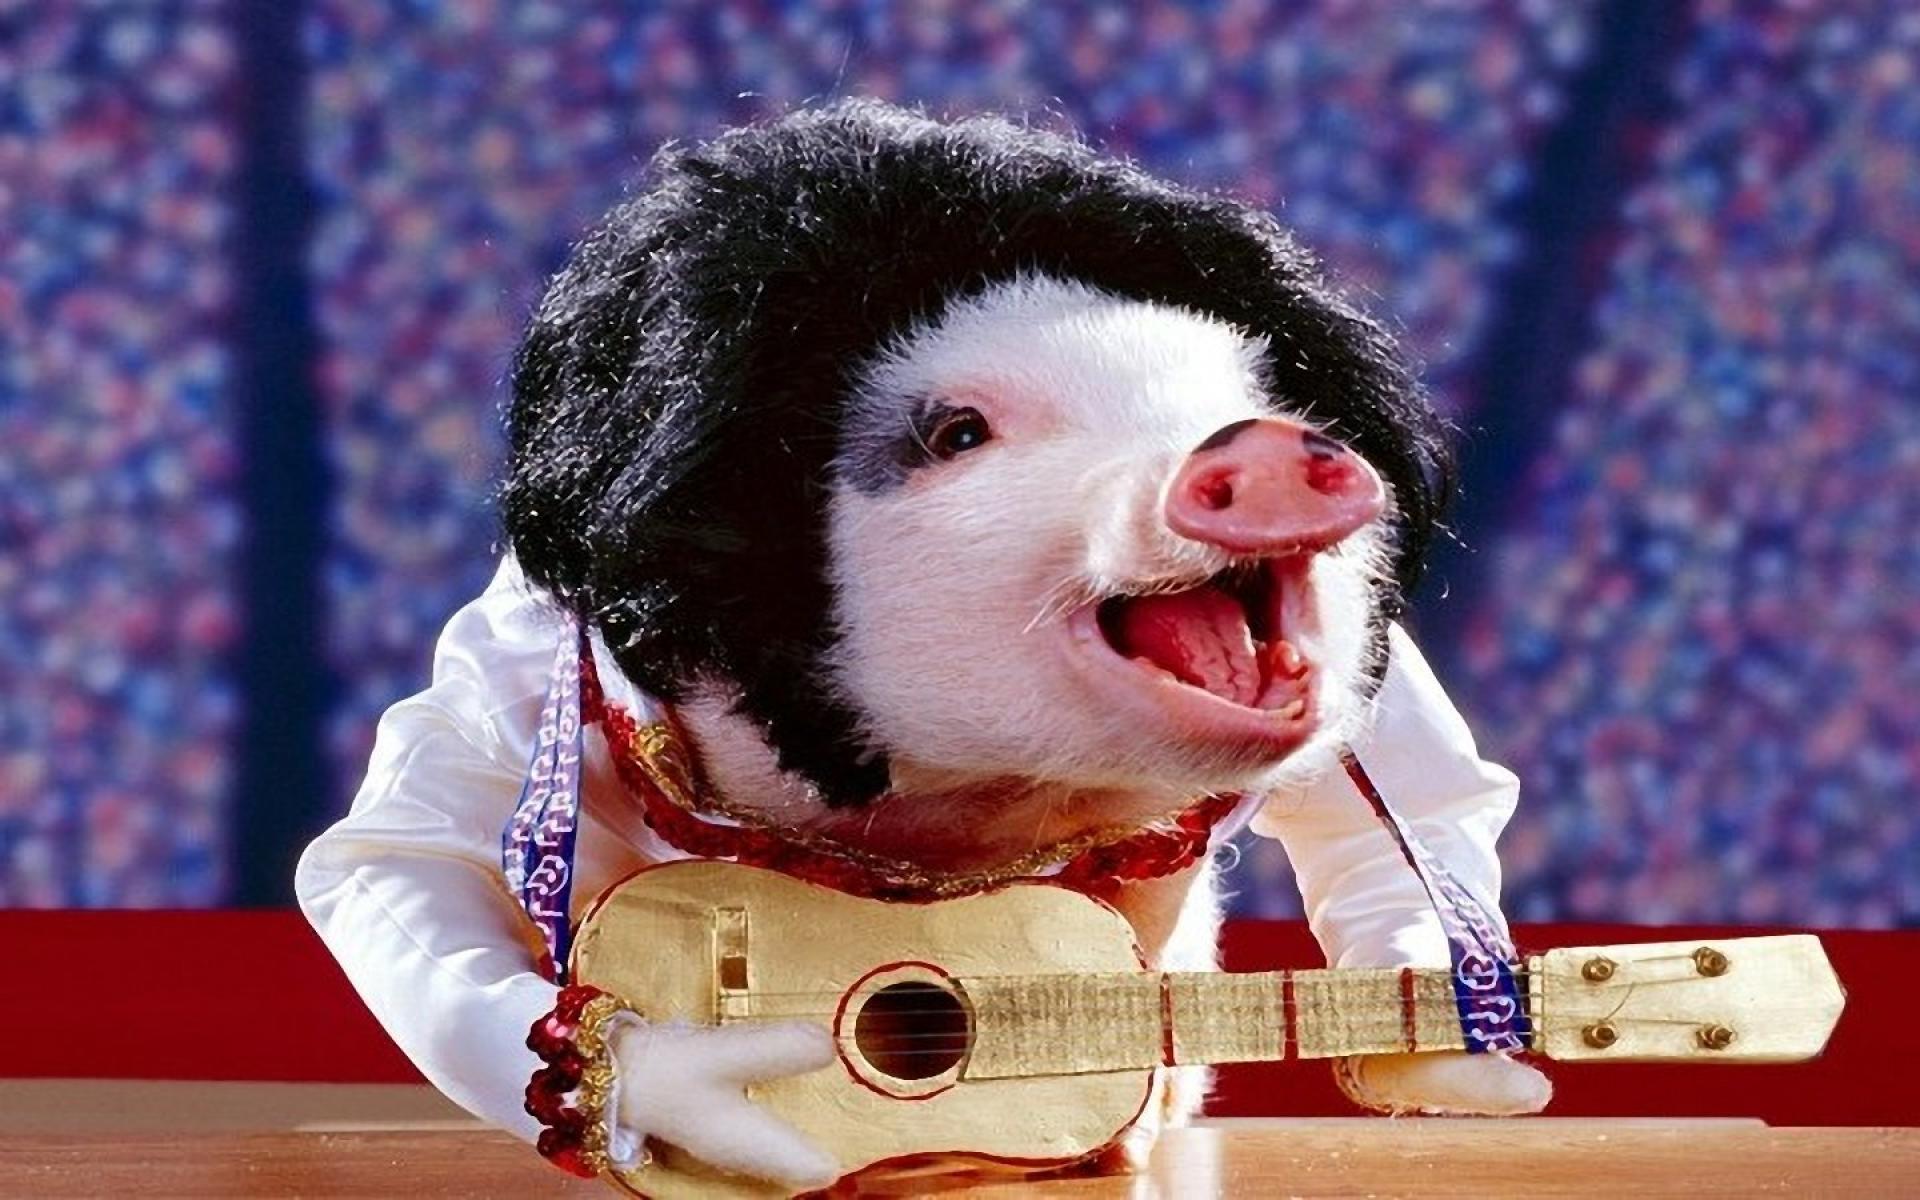 Funny Pig Playing Guitar And Singing Song - Cute Pigs With Guitar - HD Wallpaper 